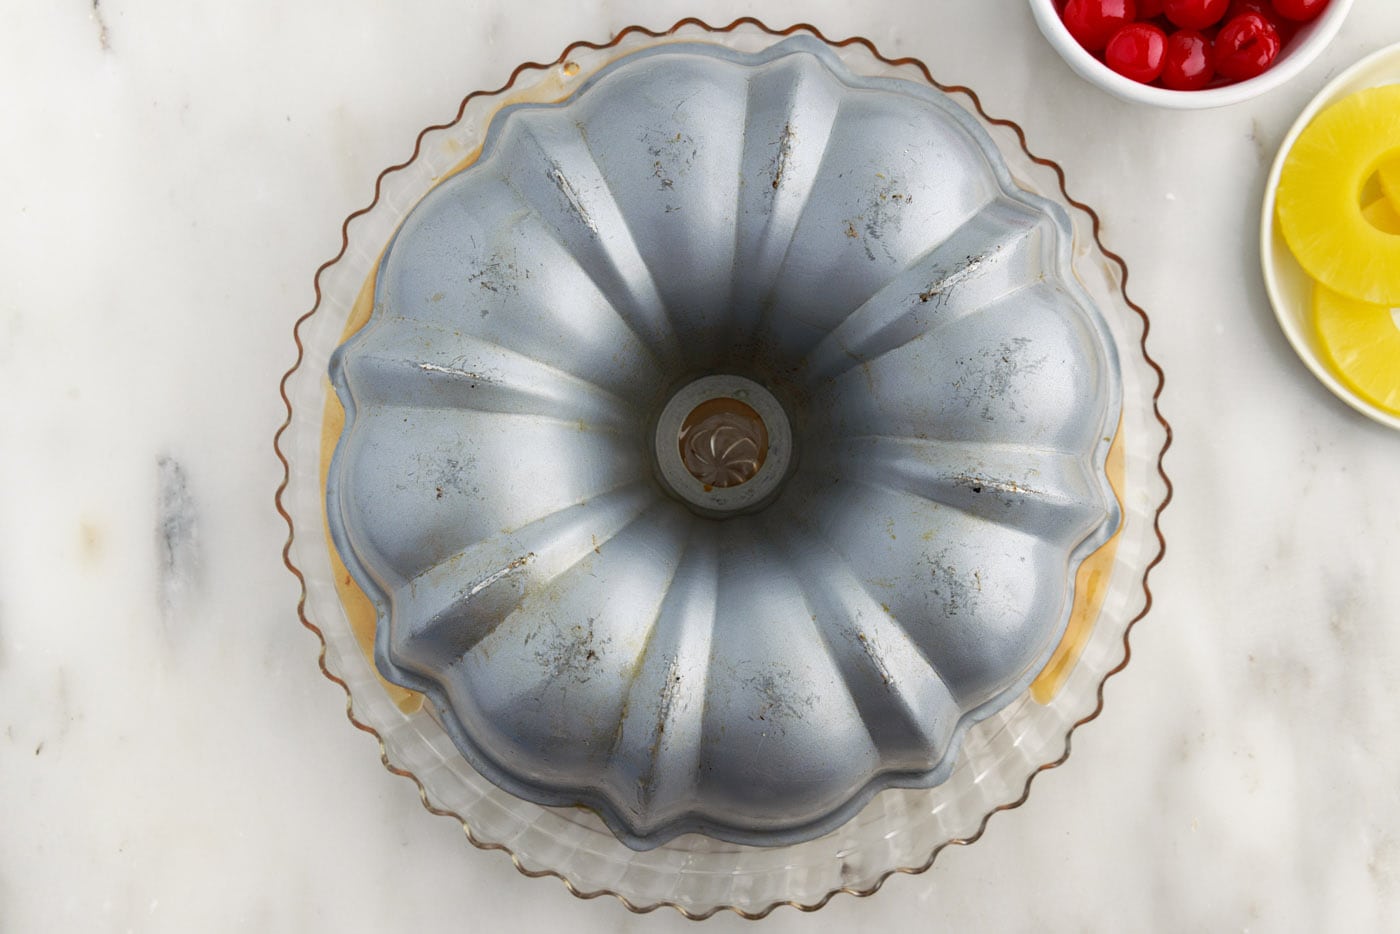 turning bundt cake pan inverted on a plate